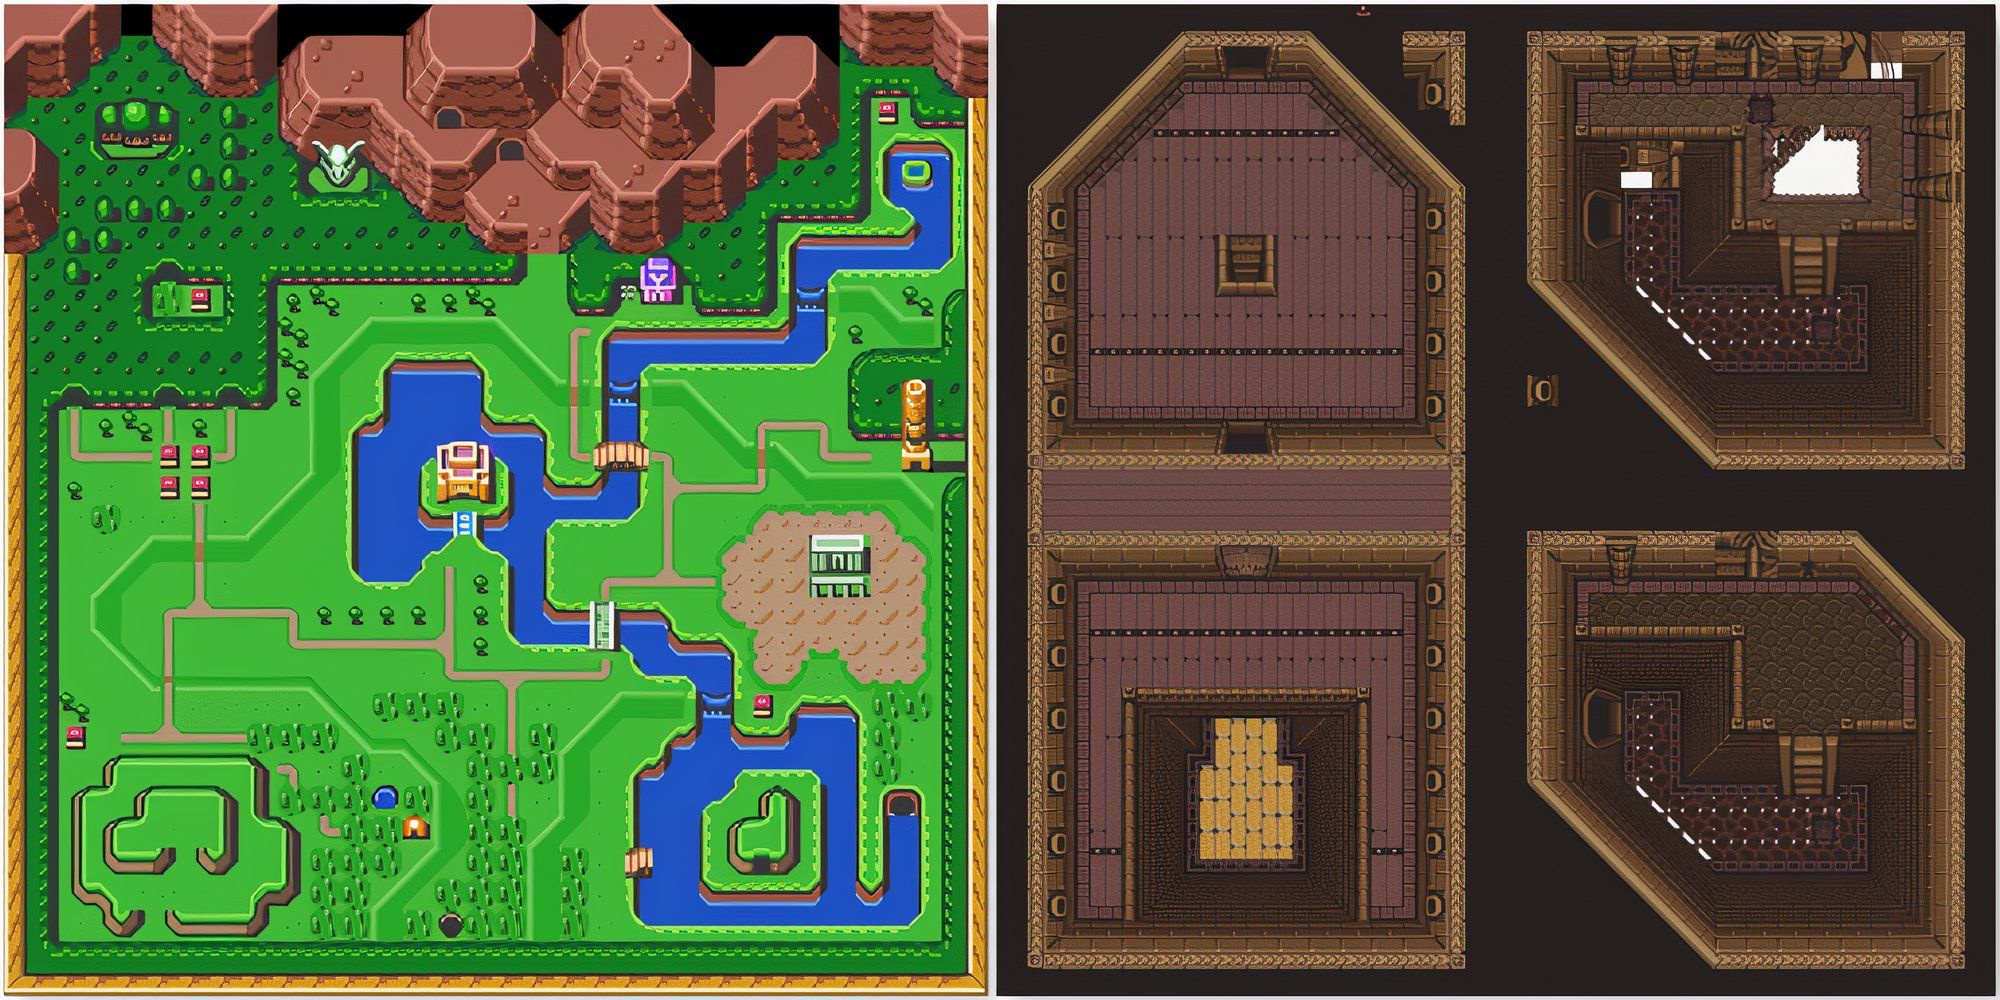 Early maps and dungeons in The Legend of Zelda A Link to the Past